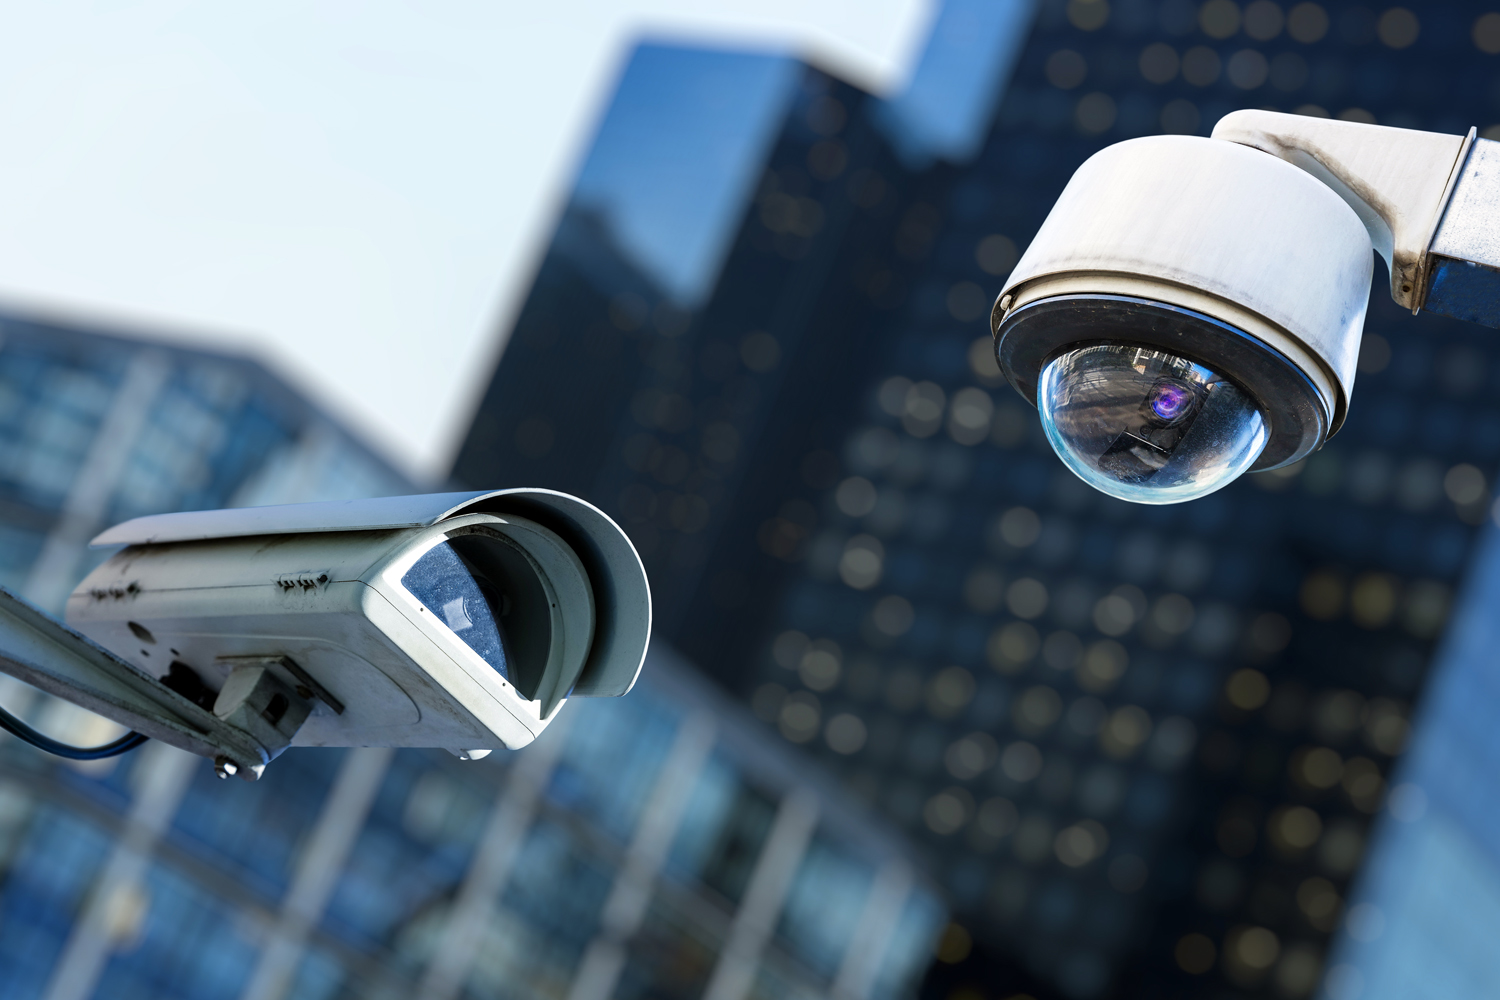 two cctv security camera in a city with blury business building on background